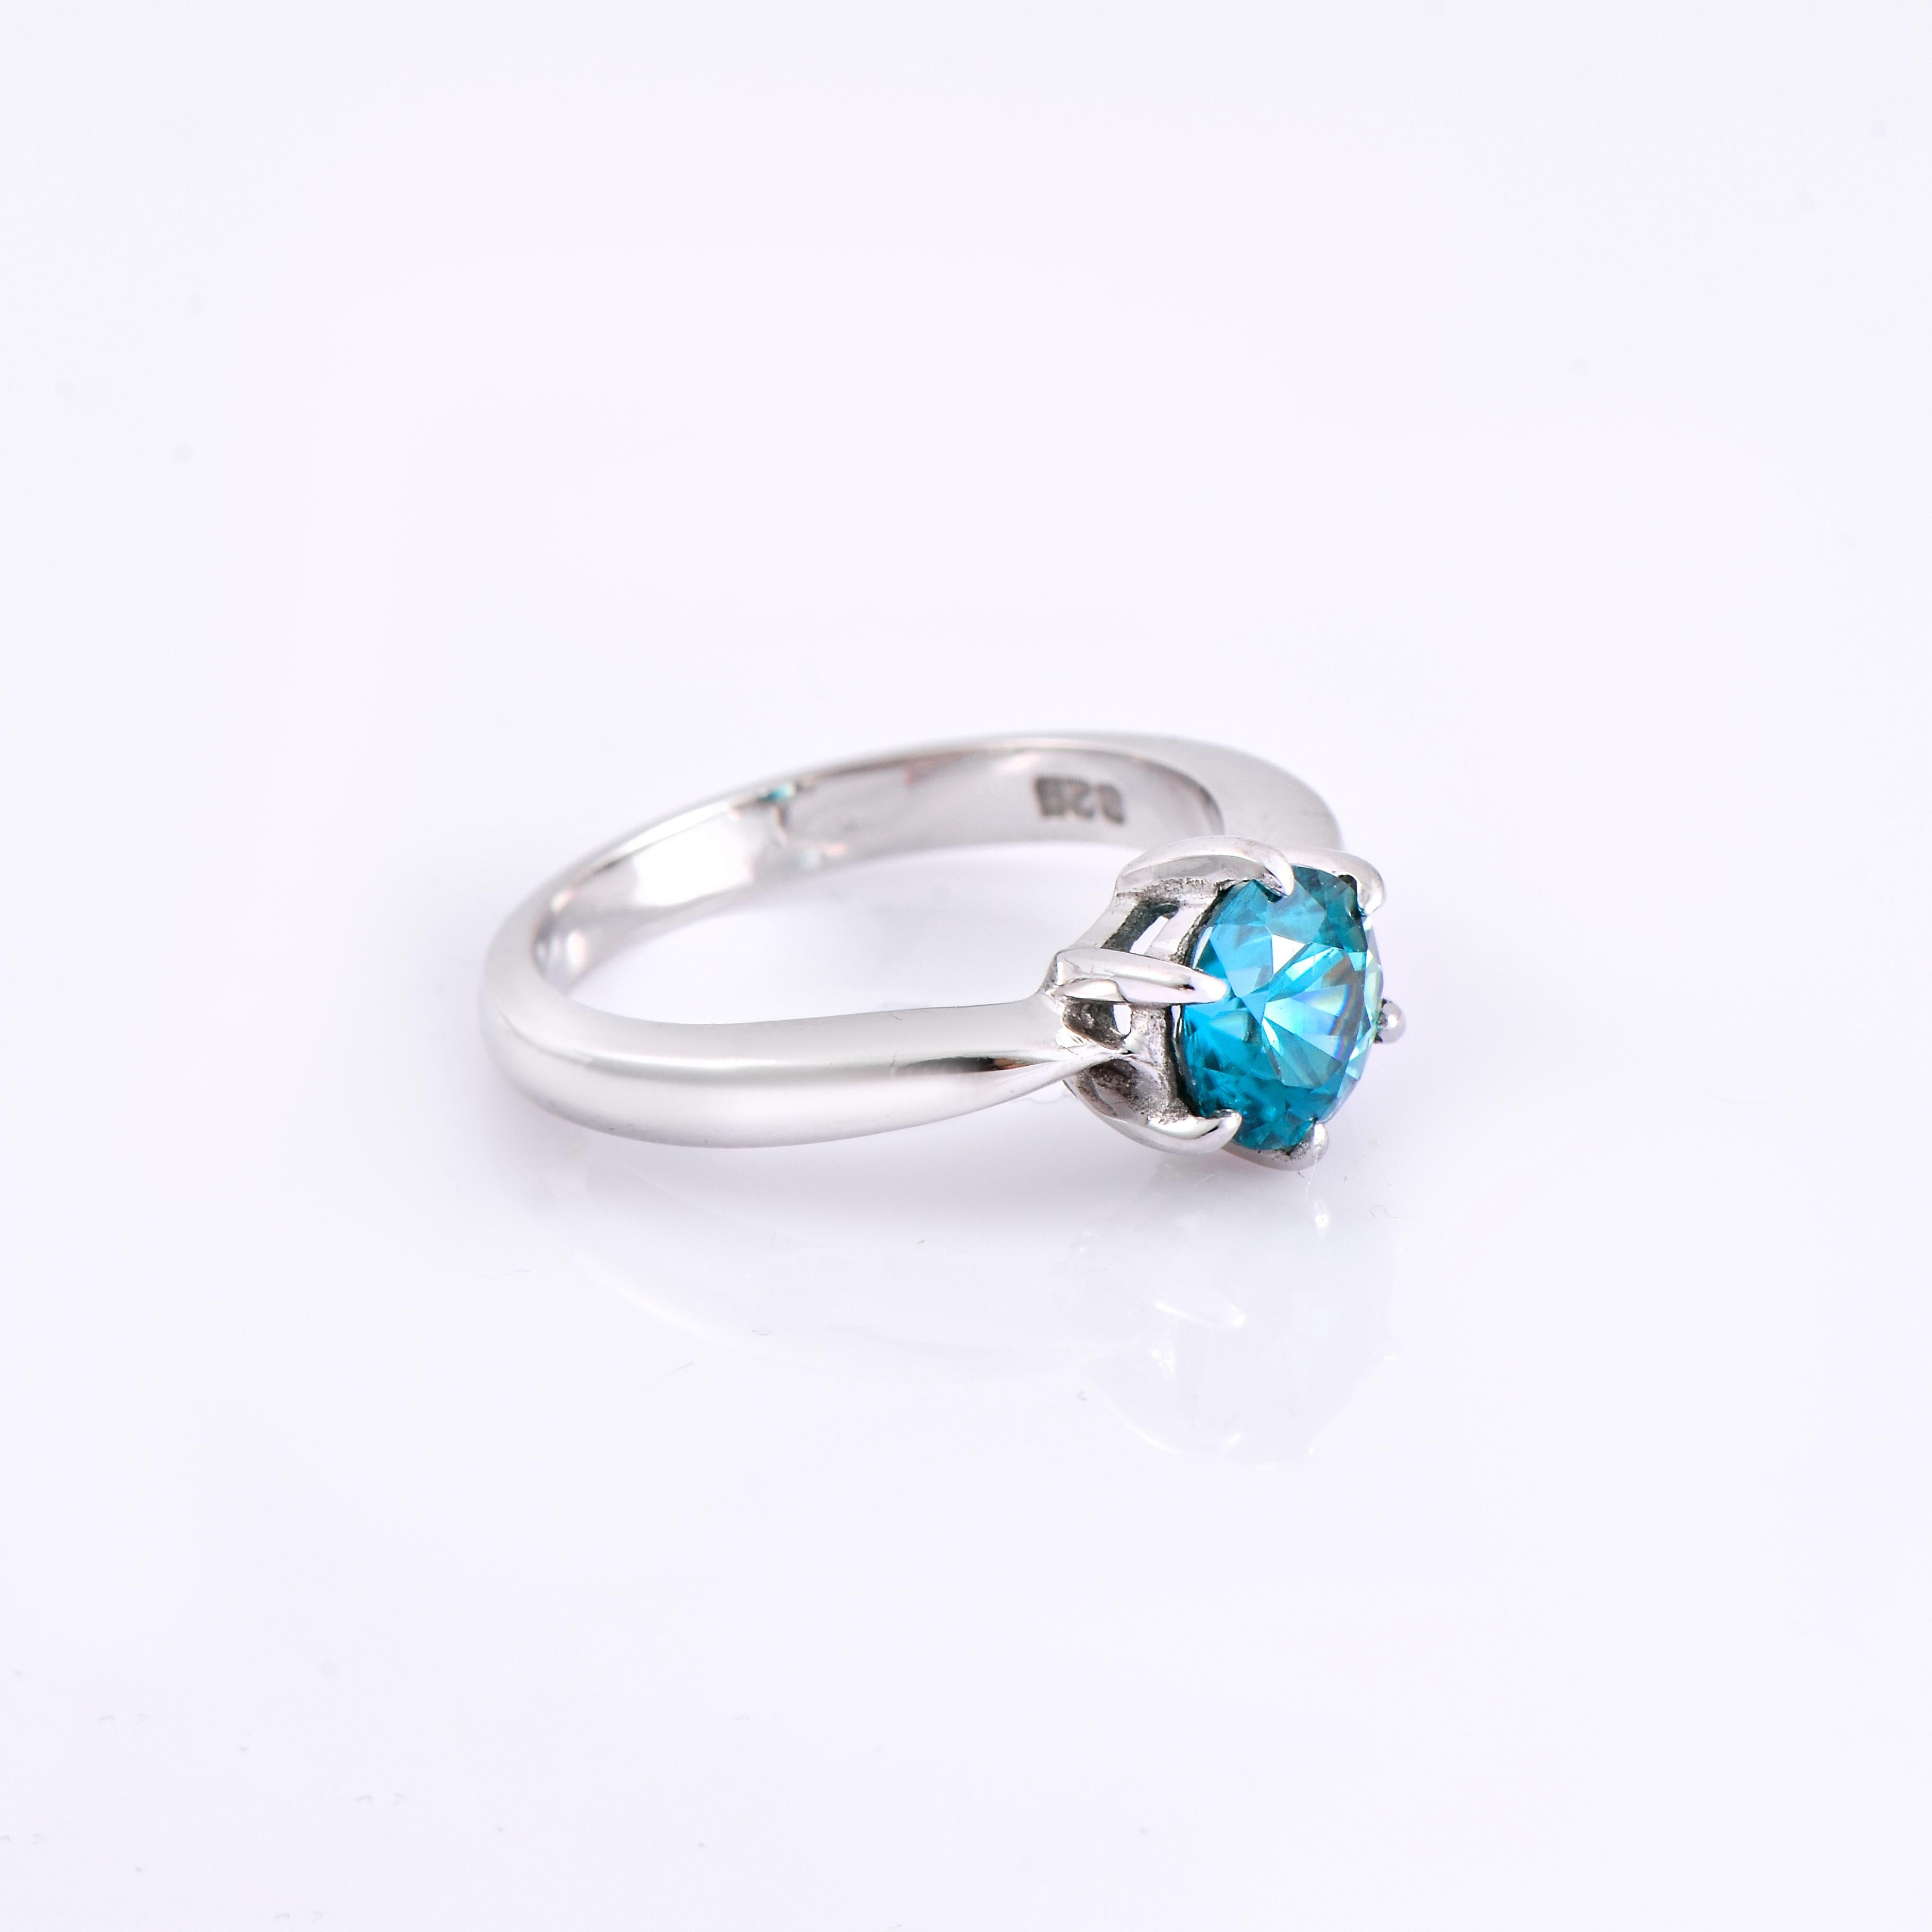 Cushion Cut Orloff of Denmark, 1.46 ct Natural Blue Zircon Ring in 925 Sterling Silver For Sale